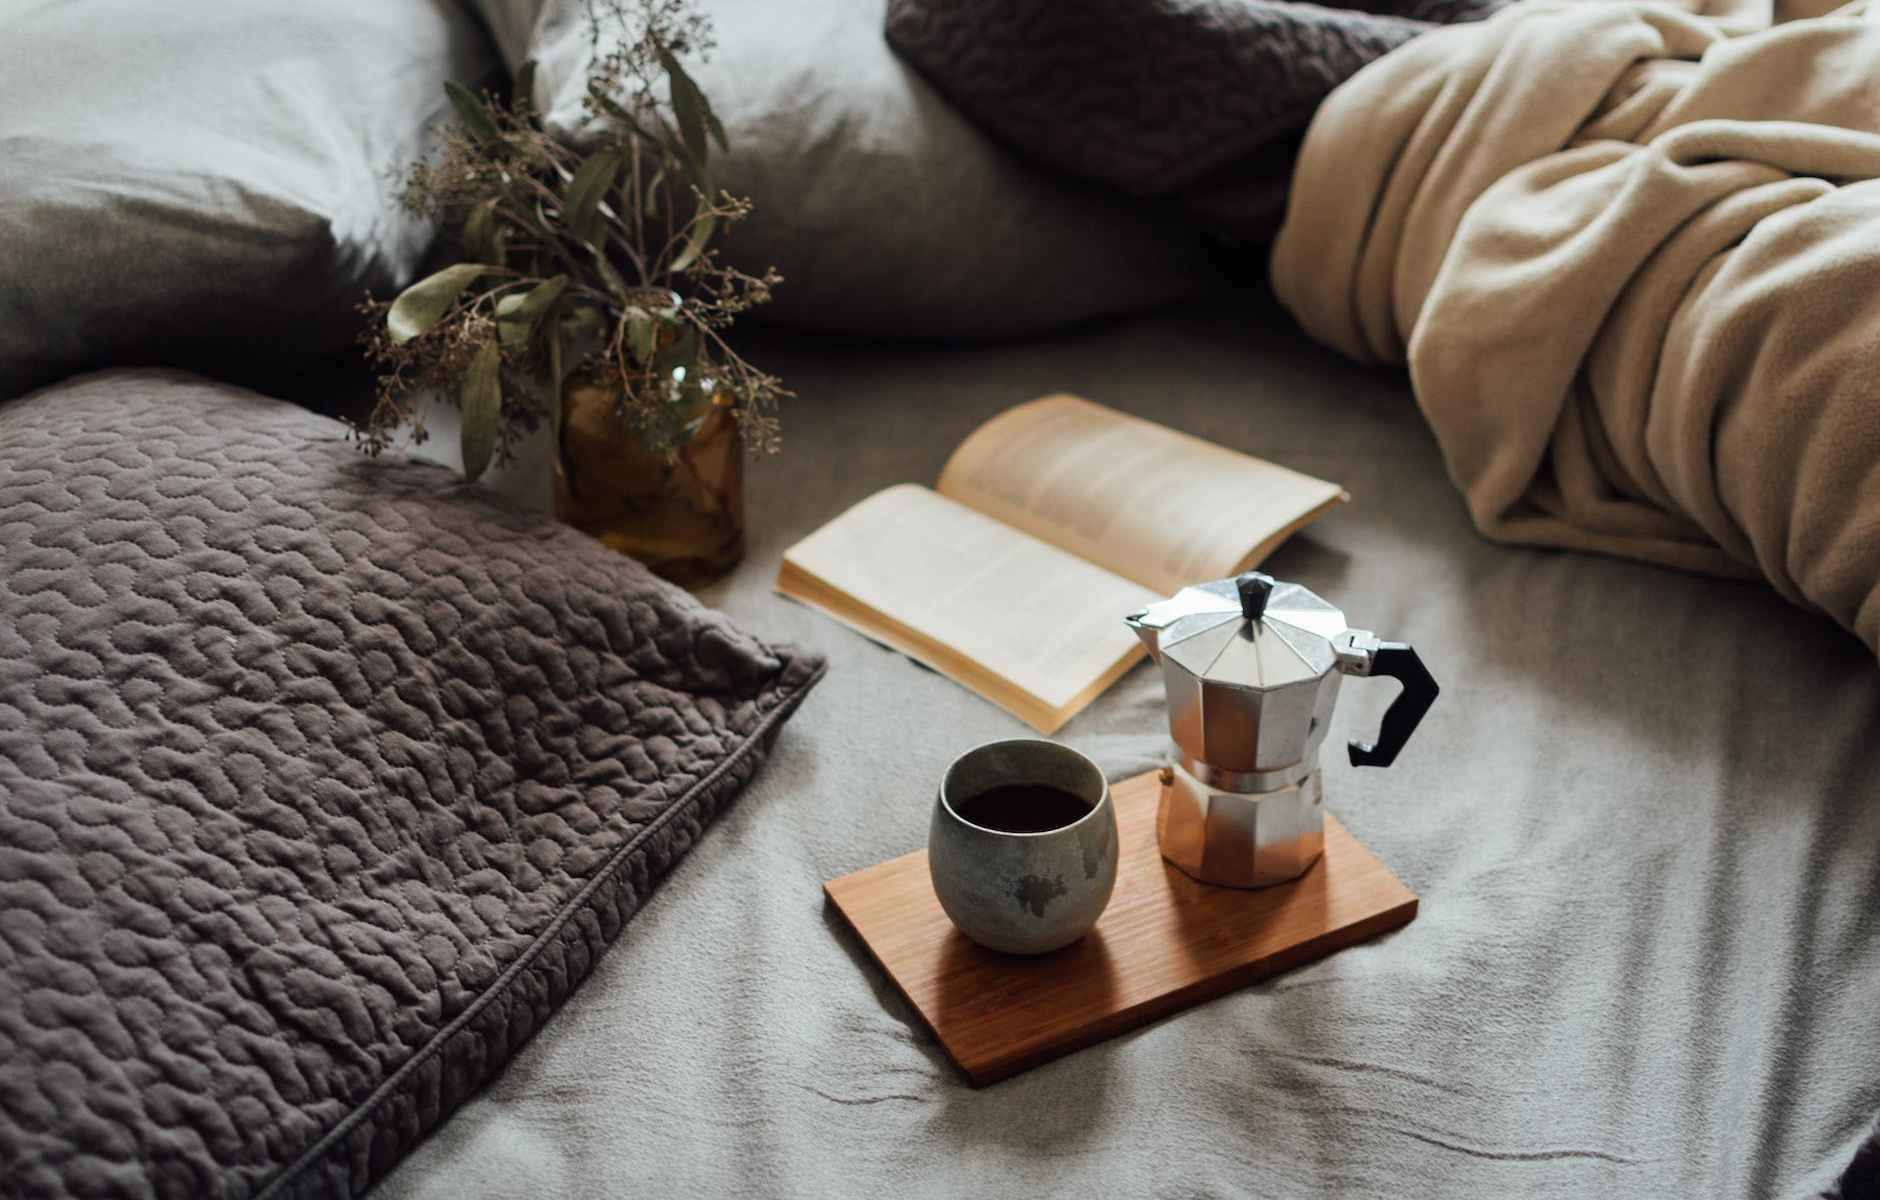 coffee and book on comfortable bed